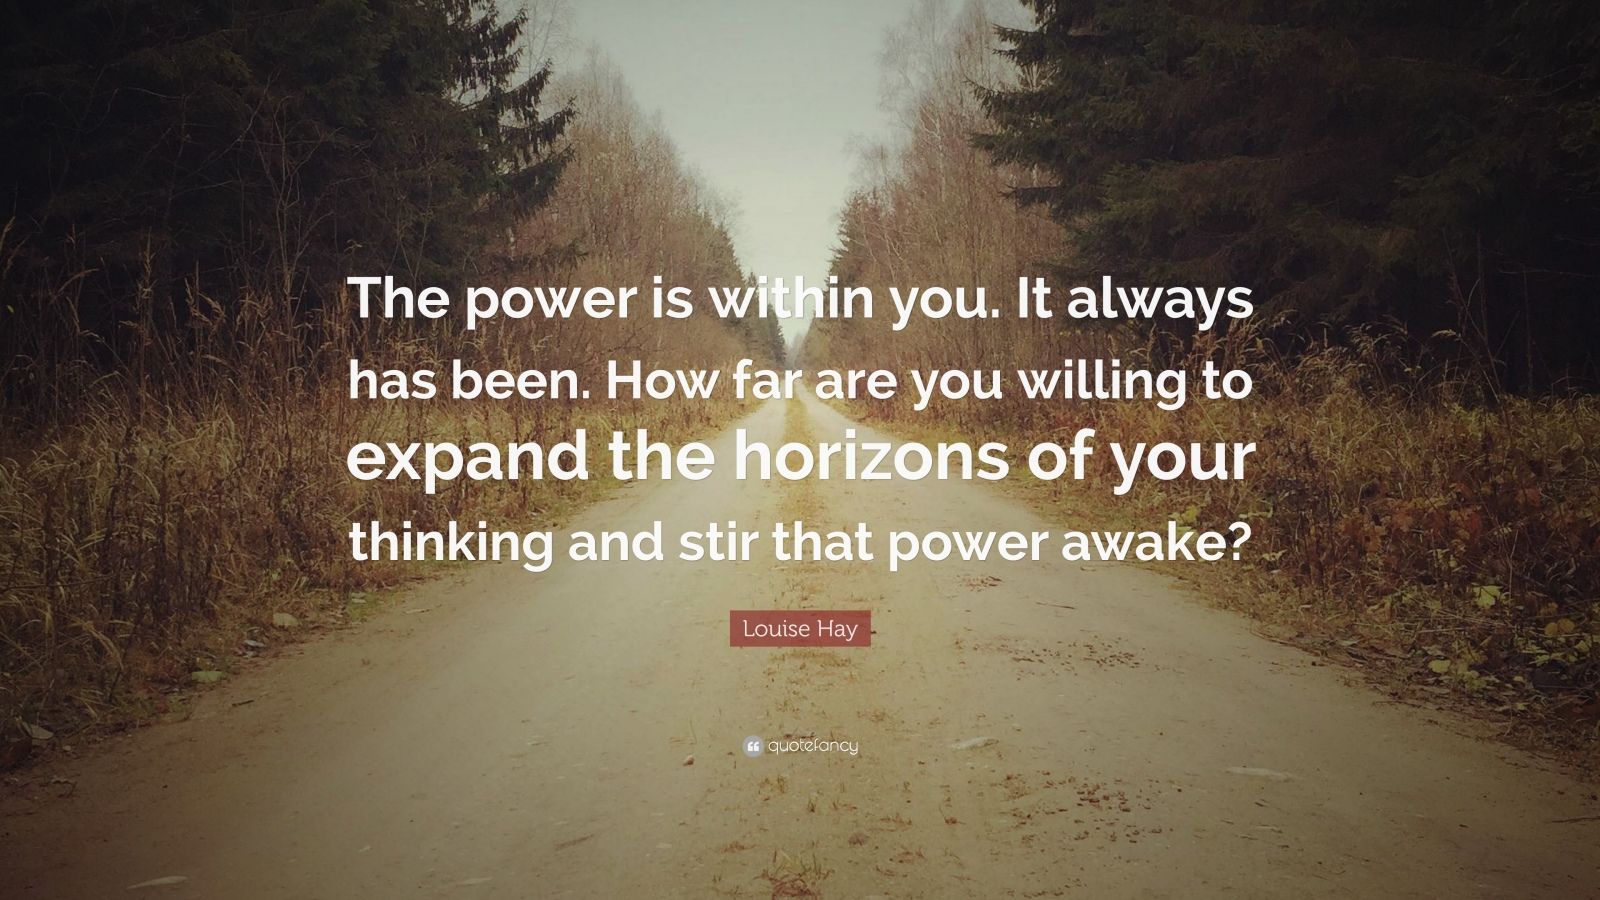 essay on power lies within you